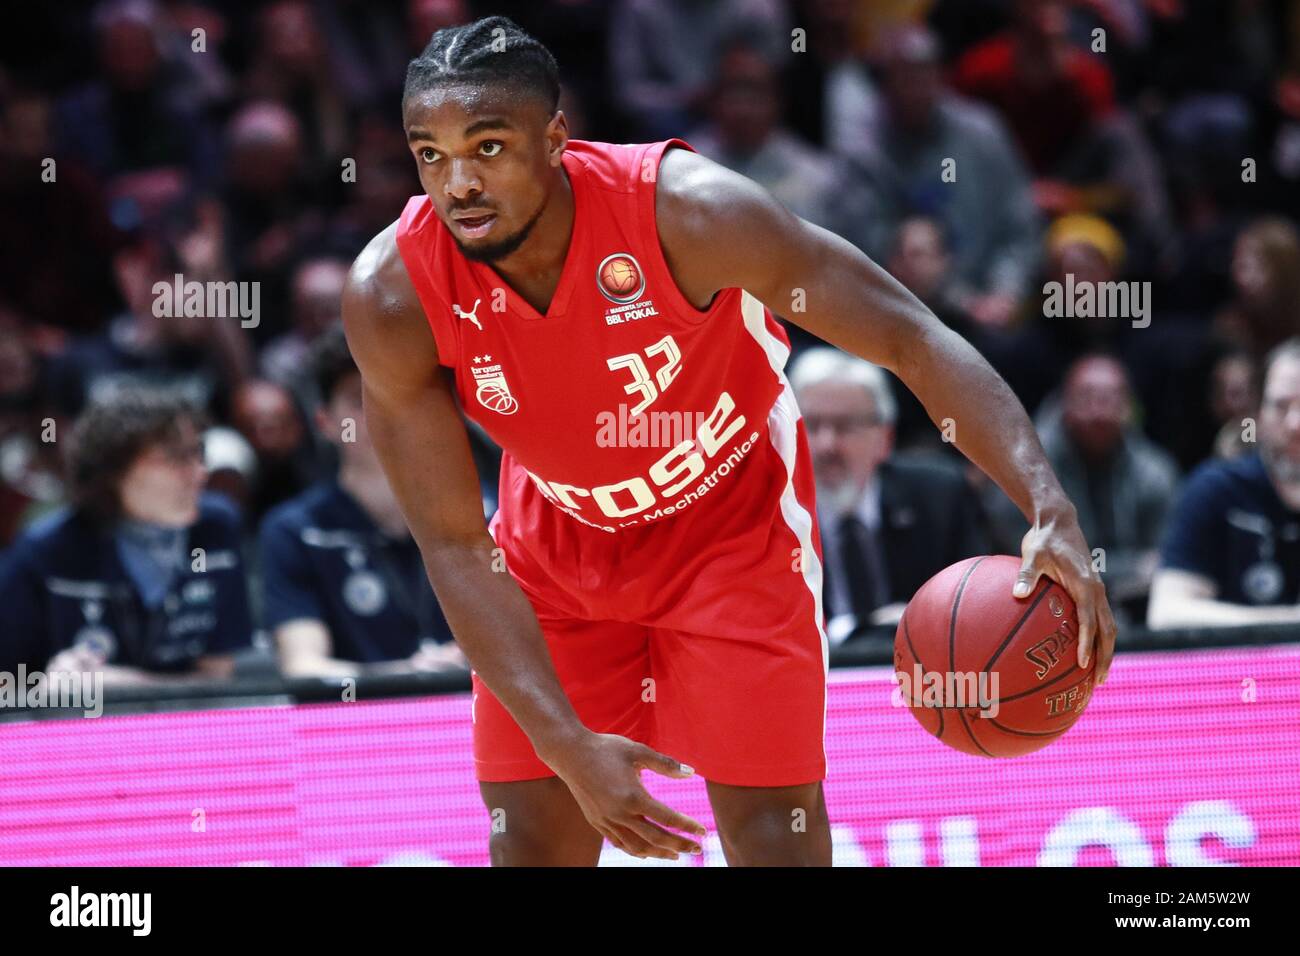 Braunschweig, Germany, December 14, 2019: Retin Obasohan of Brose Bamberg in action during the BBL Pokal game between Braunschweig and Bamberg Stock Photo